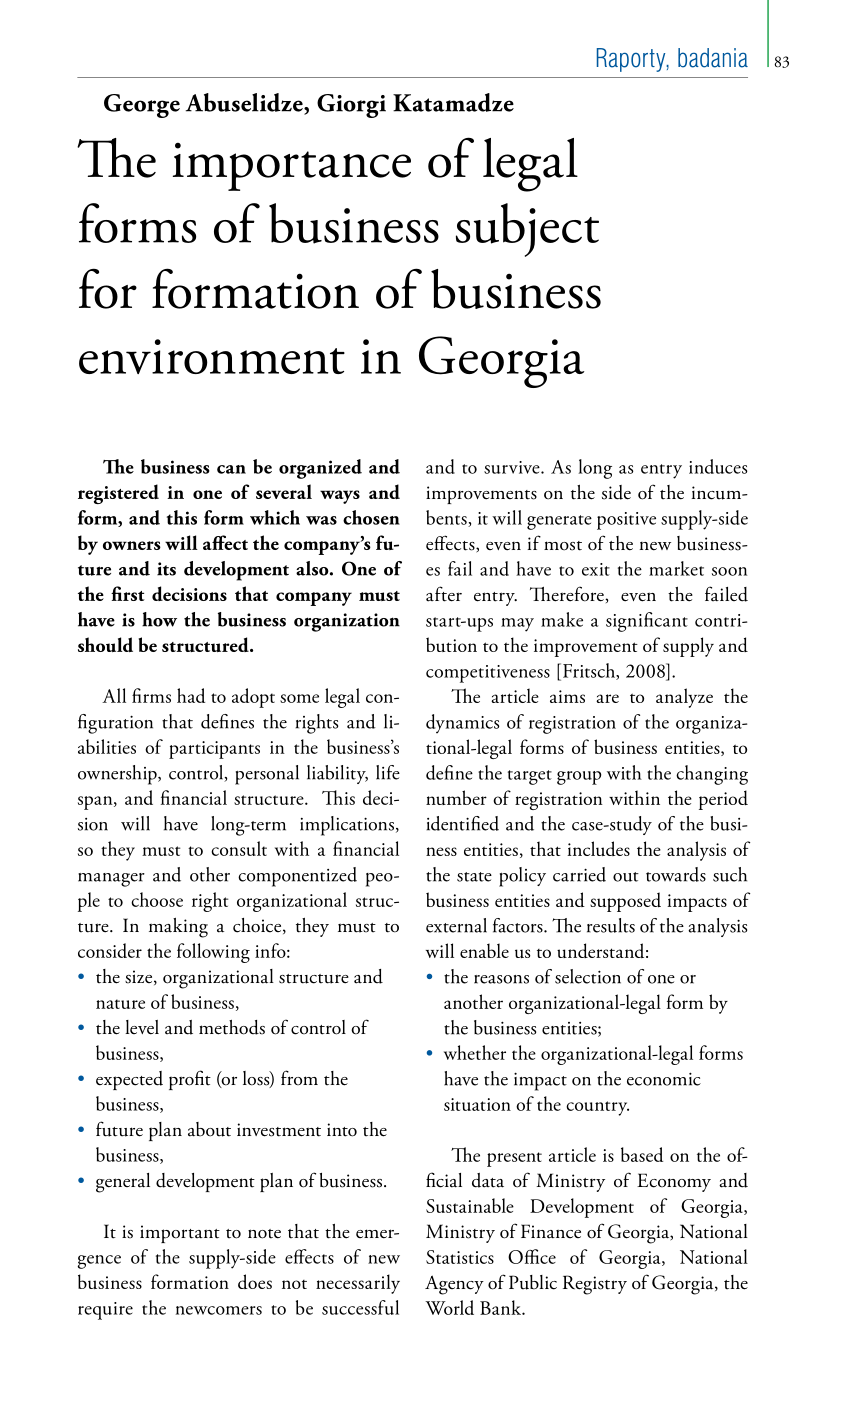 Legal Forms of Business Paper